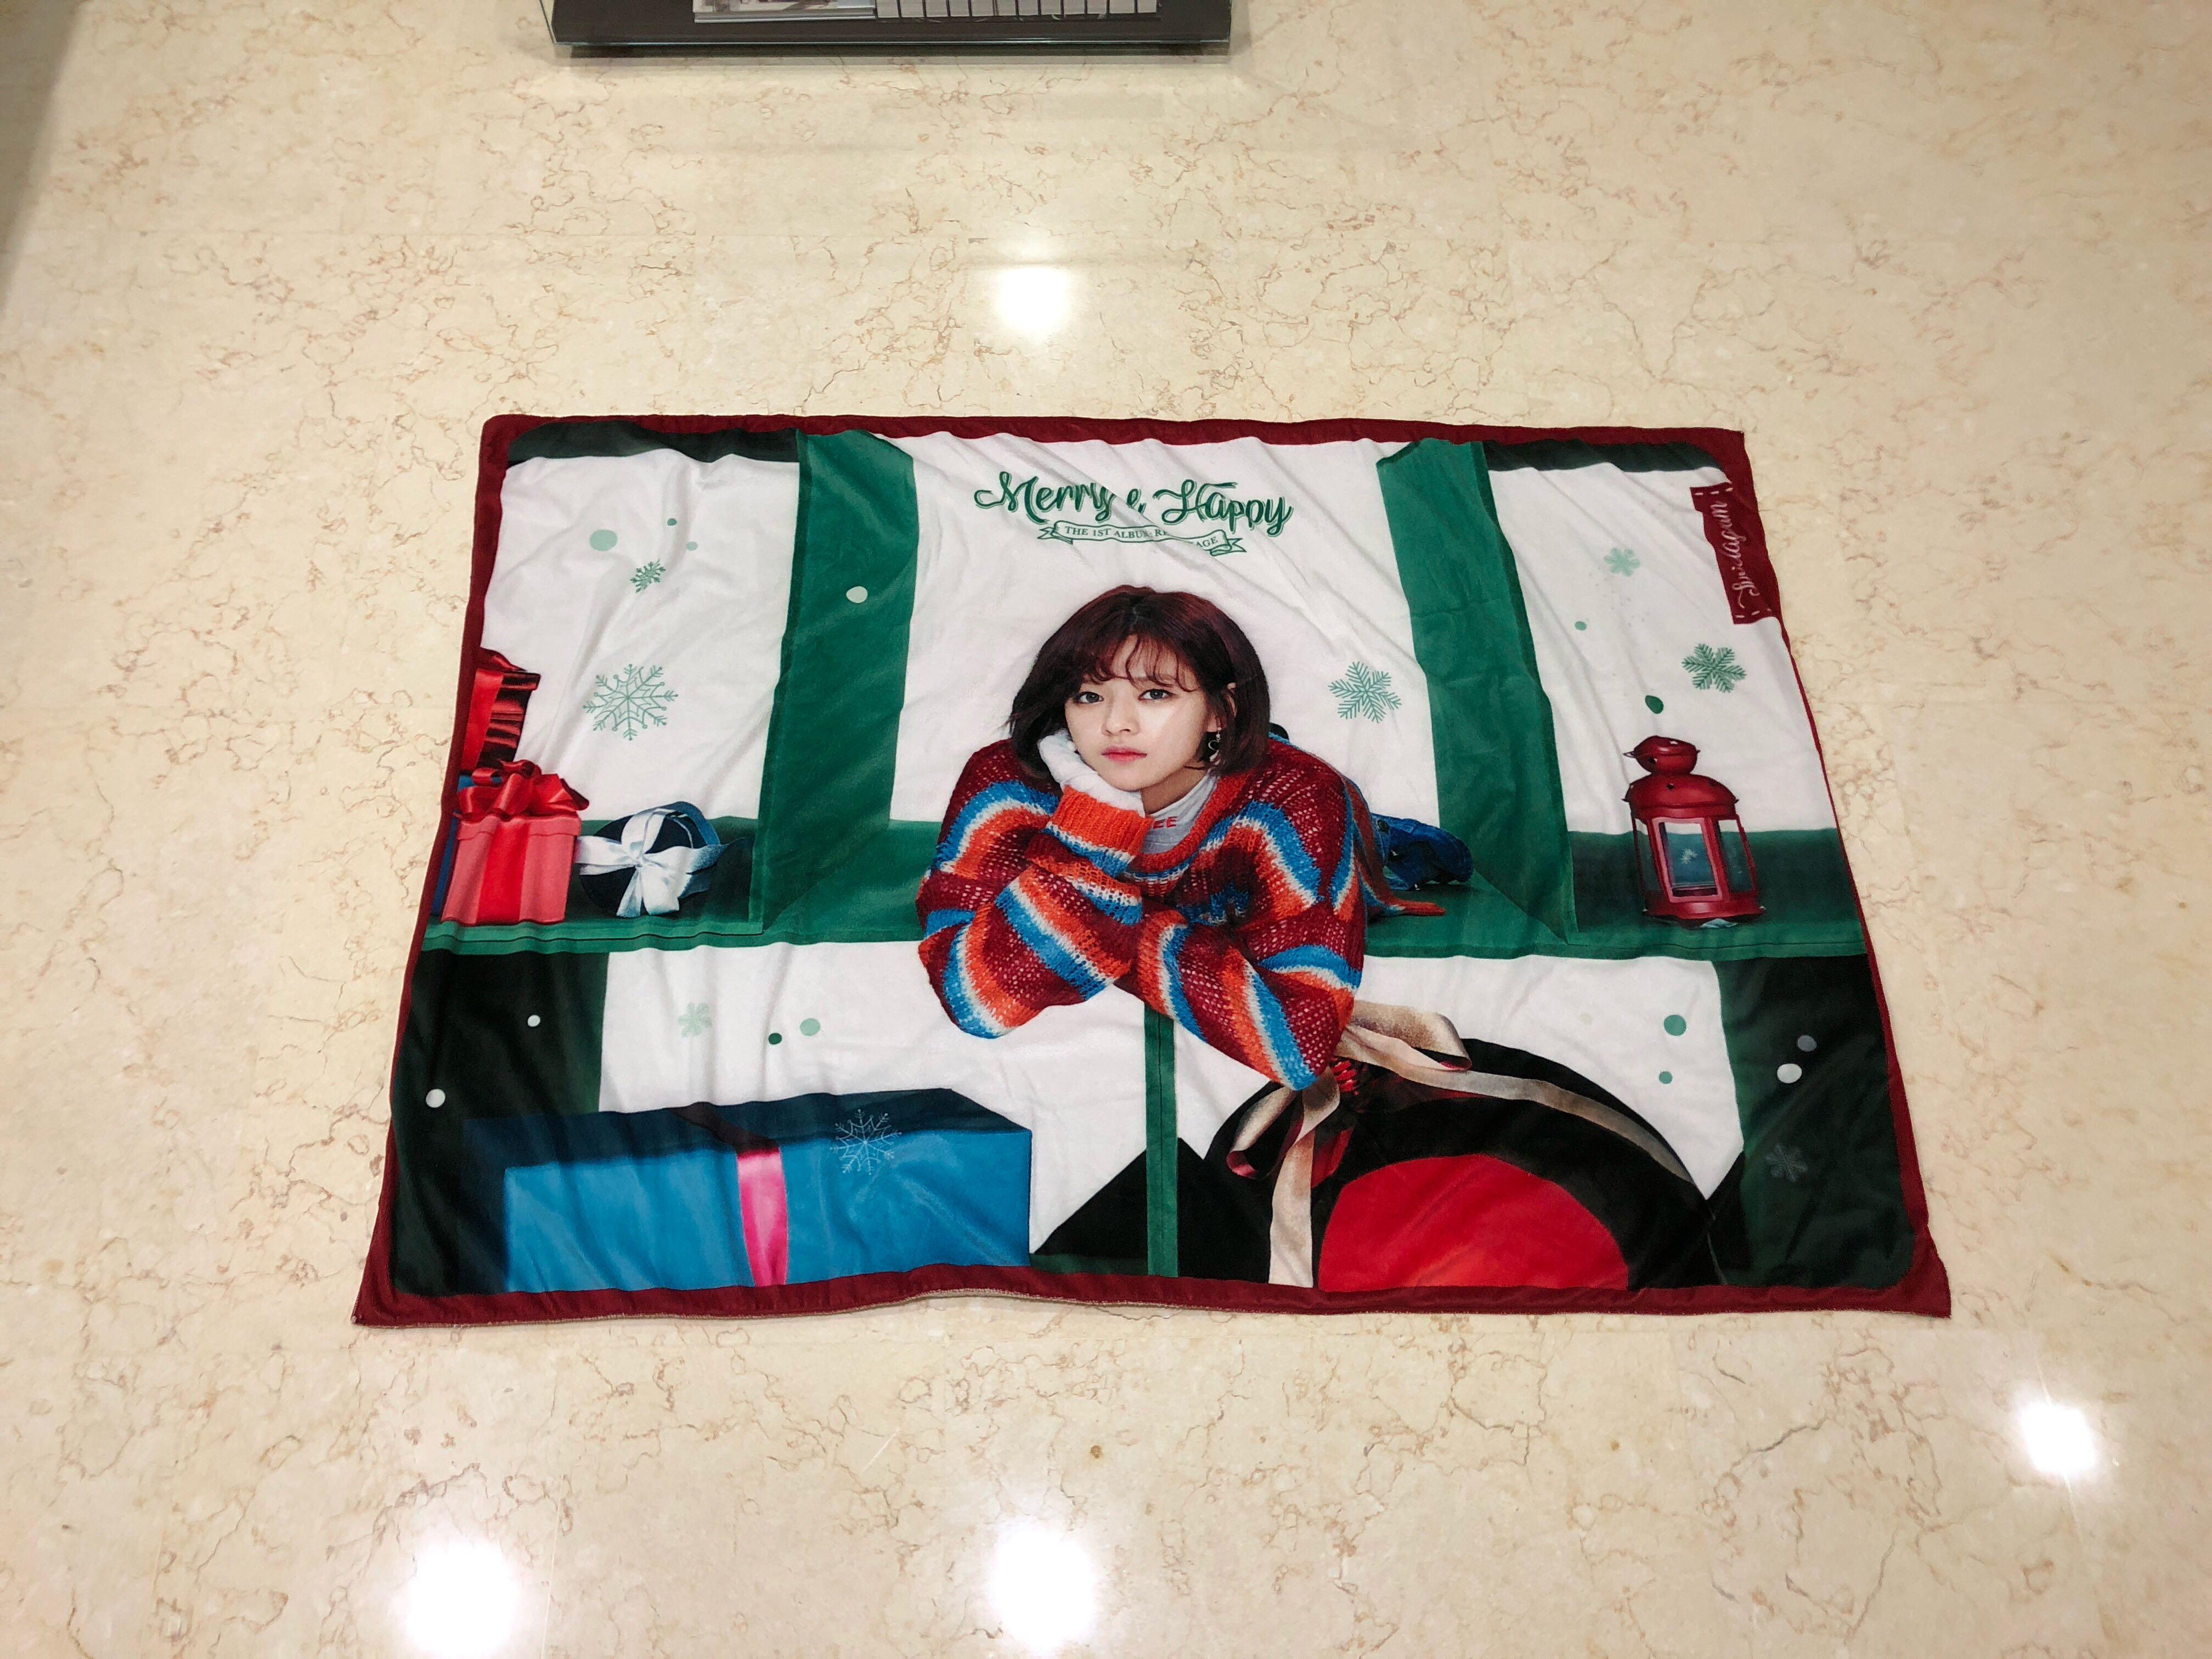 Wts Twice Jeongyeon Merry And Happy Photo Blanket Hobbies Toys Memorabilia Collectibles K Wave On Carousell